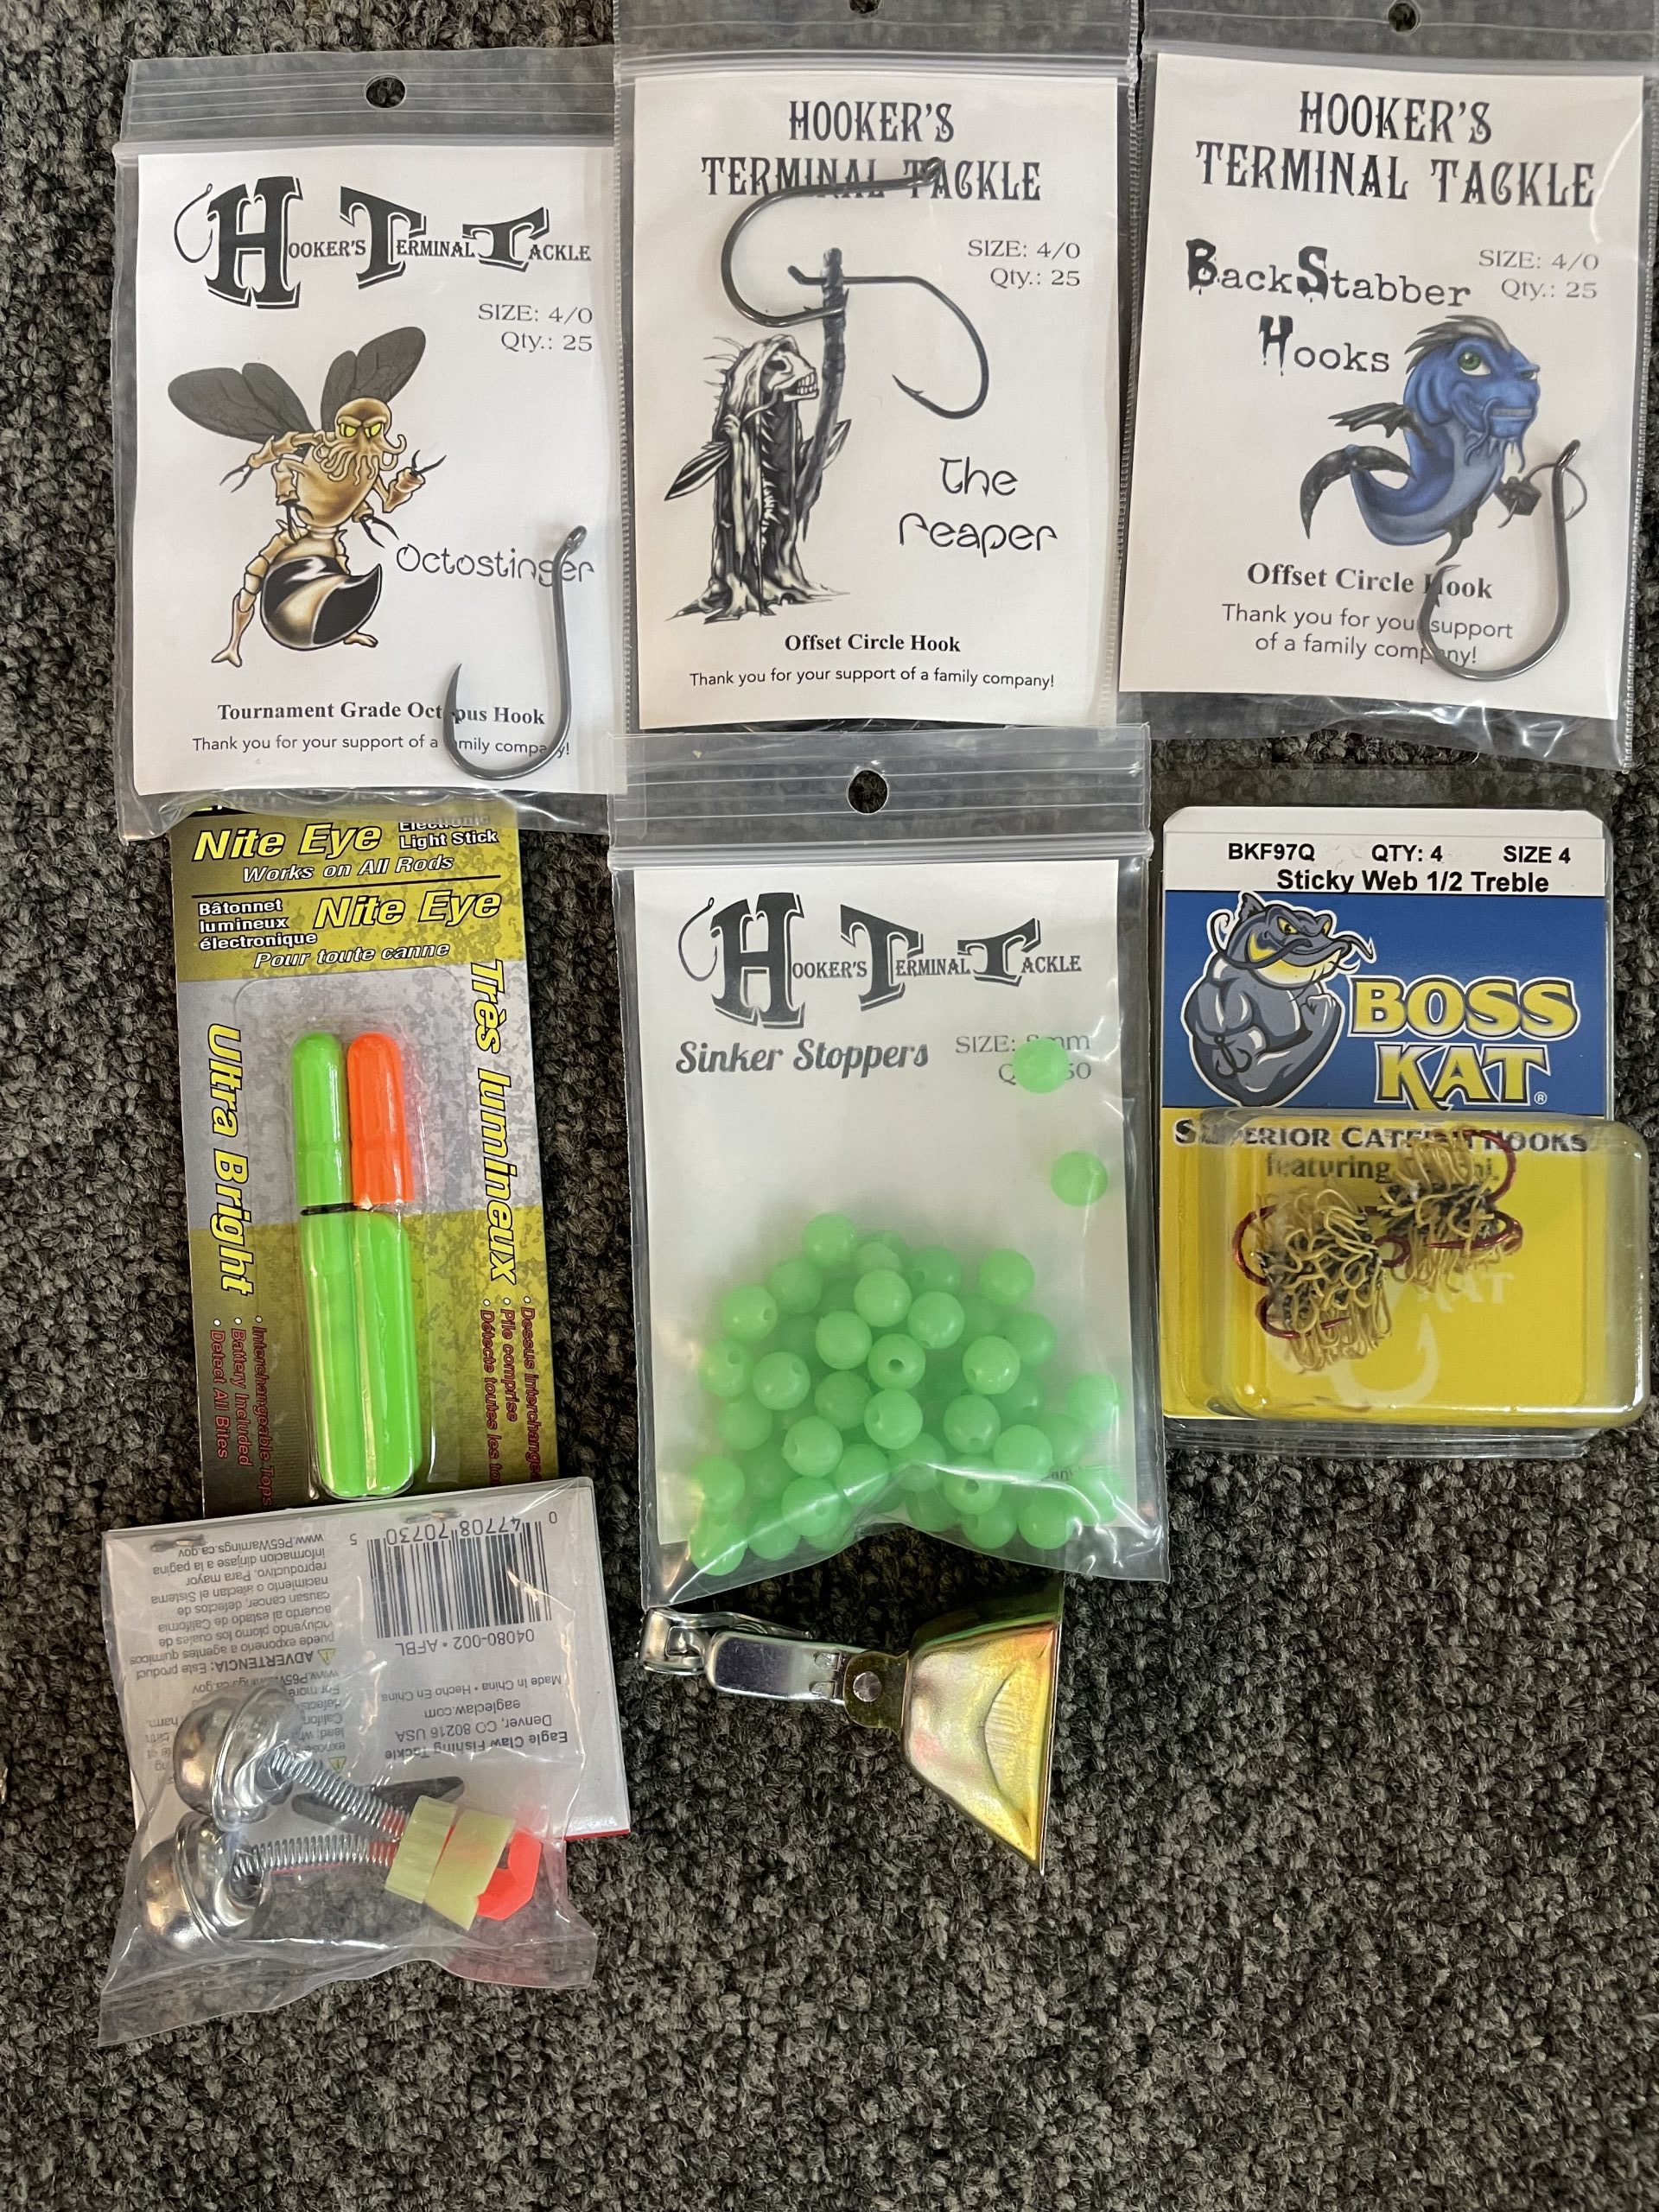 All Products, Hookers Terminal Tackle